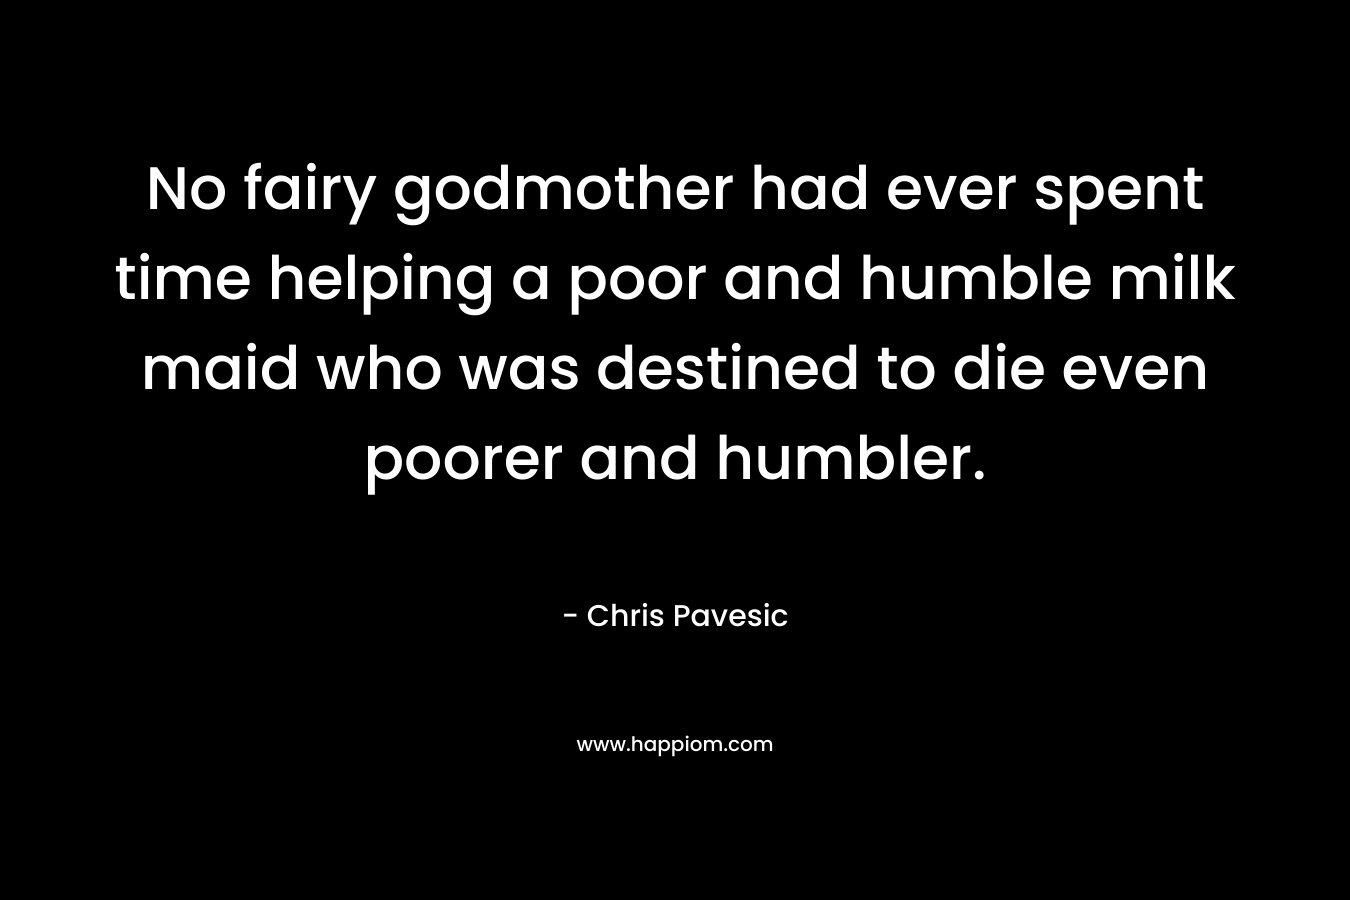 No fairy godmother had ever spent time helping a poor and humble milk maid who was destined to die even poorer and humbler.